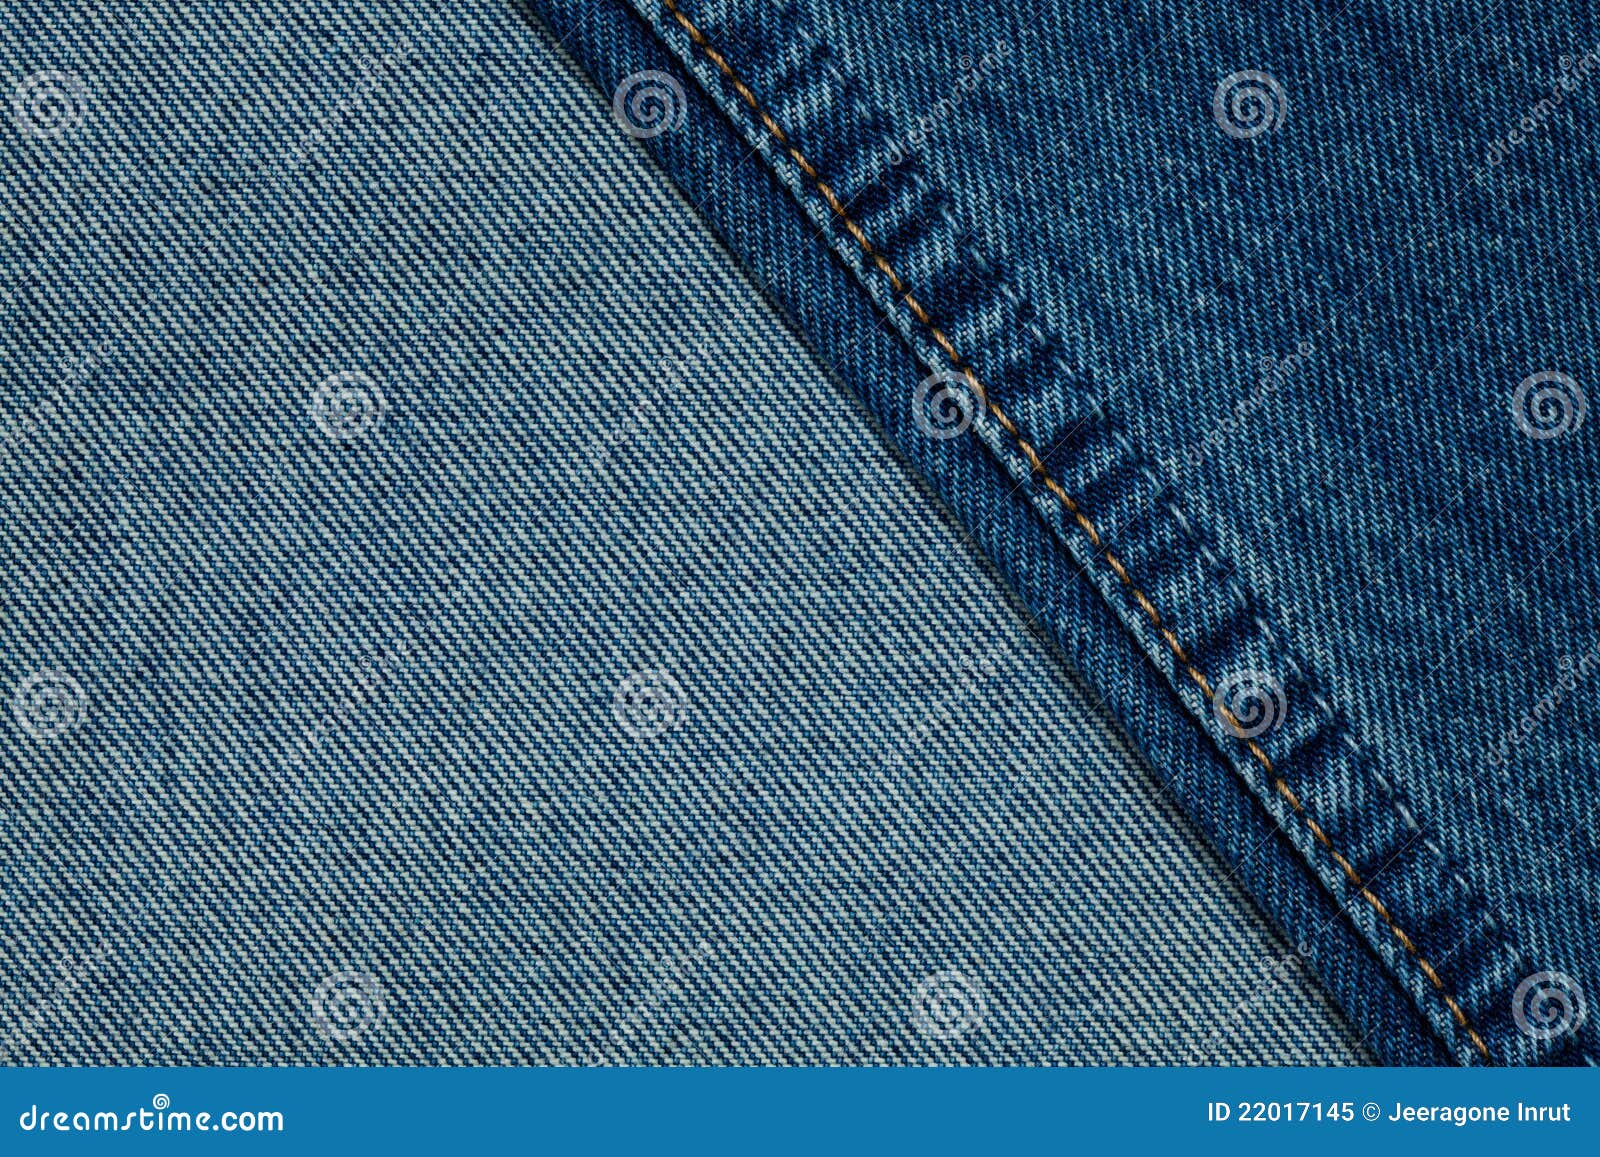 Blue jeans cloth stock image. Image of macro, trend, fashion - 22017145